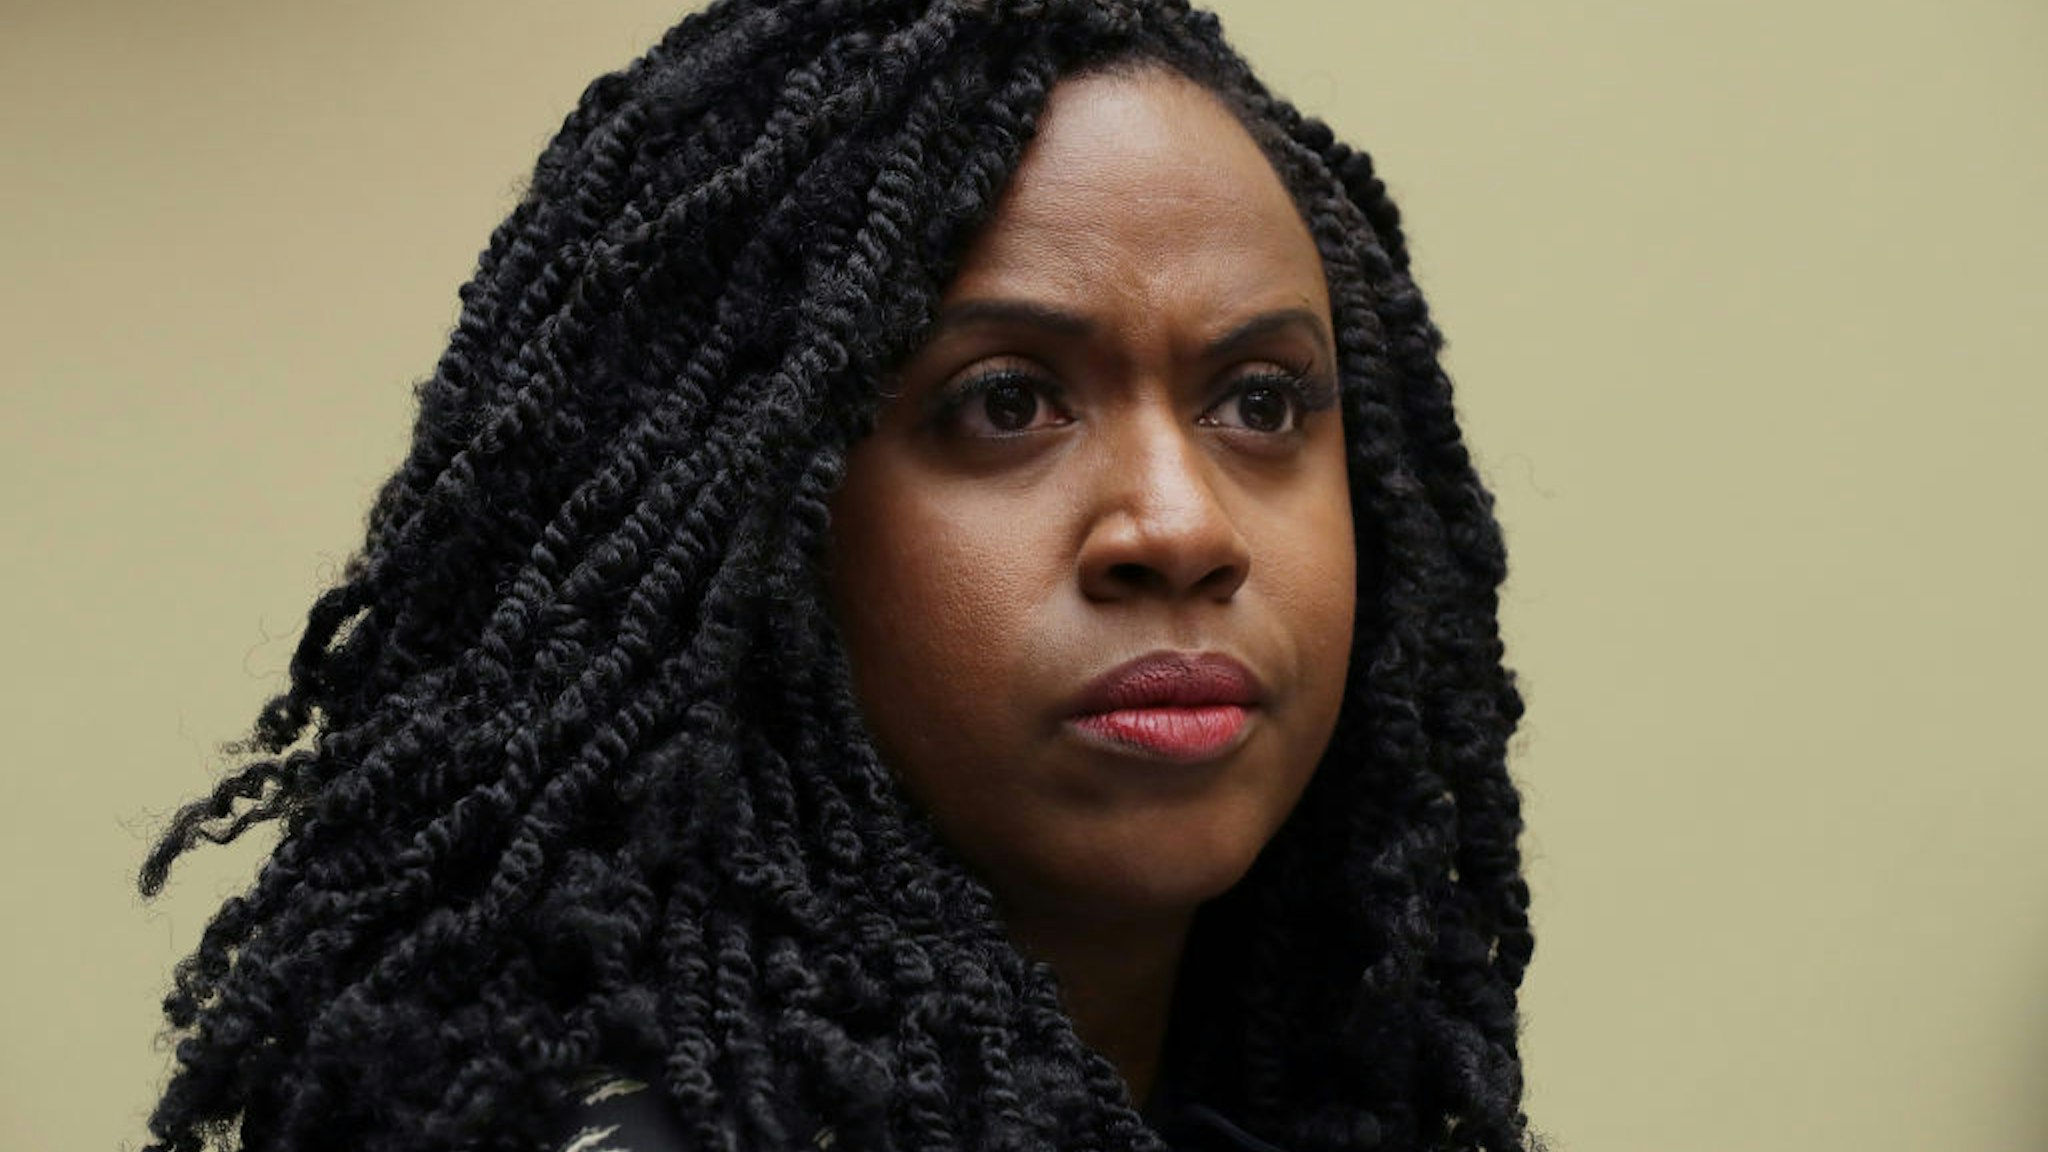 Ayanna Pressley attends a hearing on drug pricing in the Rayburn House Office building